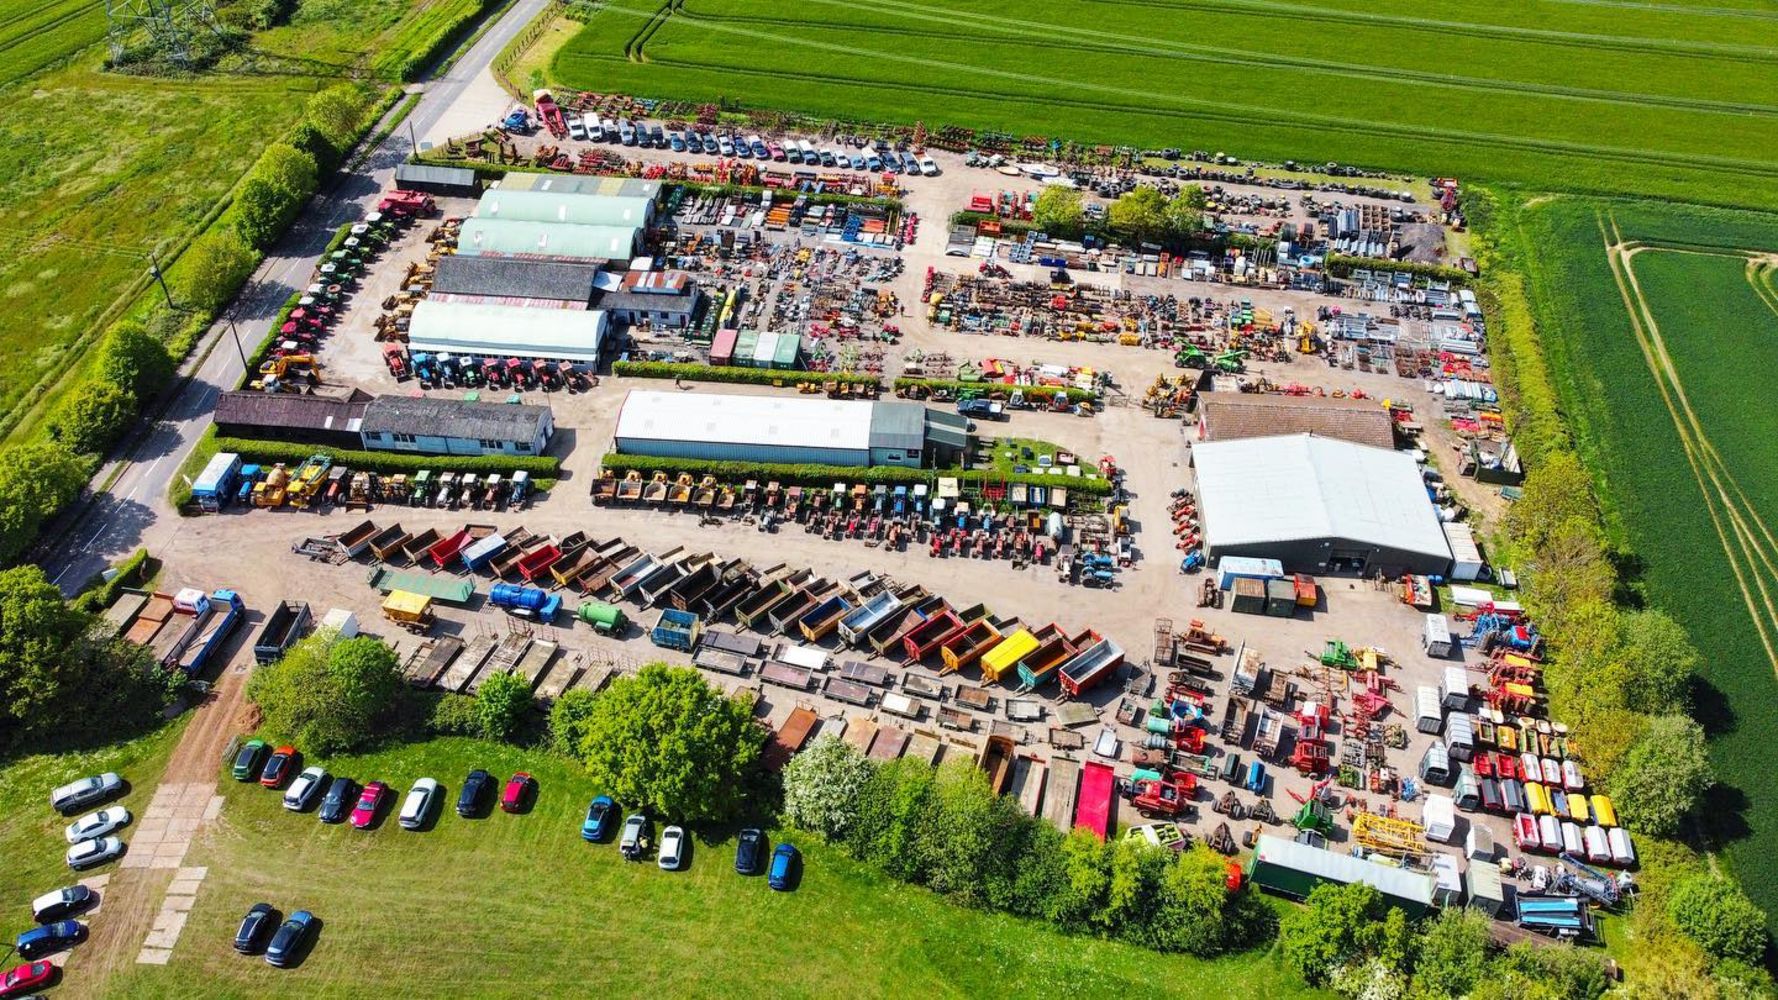 Timed Online Collective Sale of Tractors, Plant, Vehicles, Trailers, Machinery, Tools & Spares - SALE 1 - Lots 1-2000